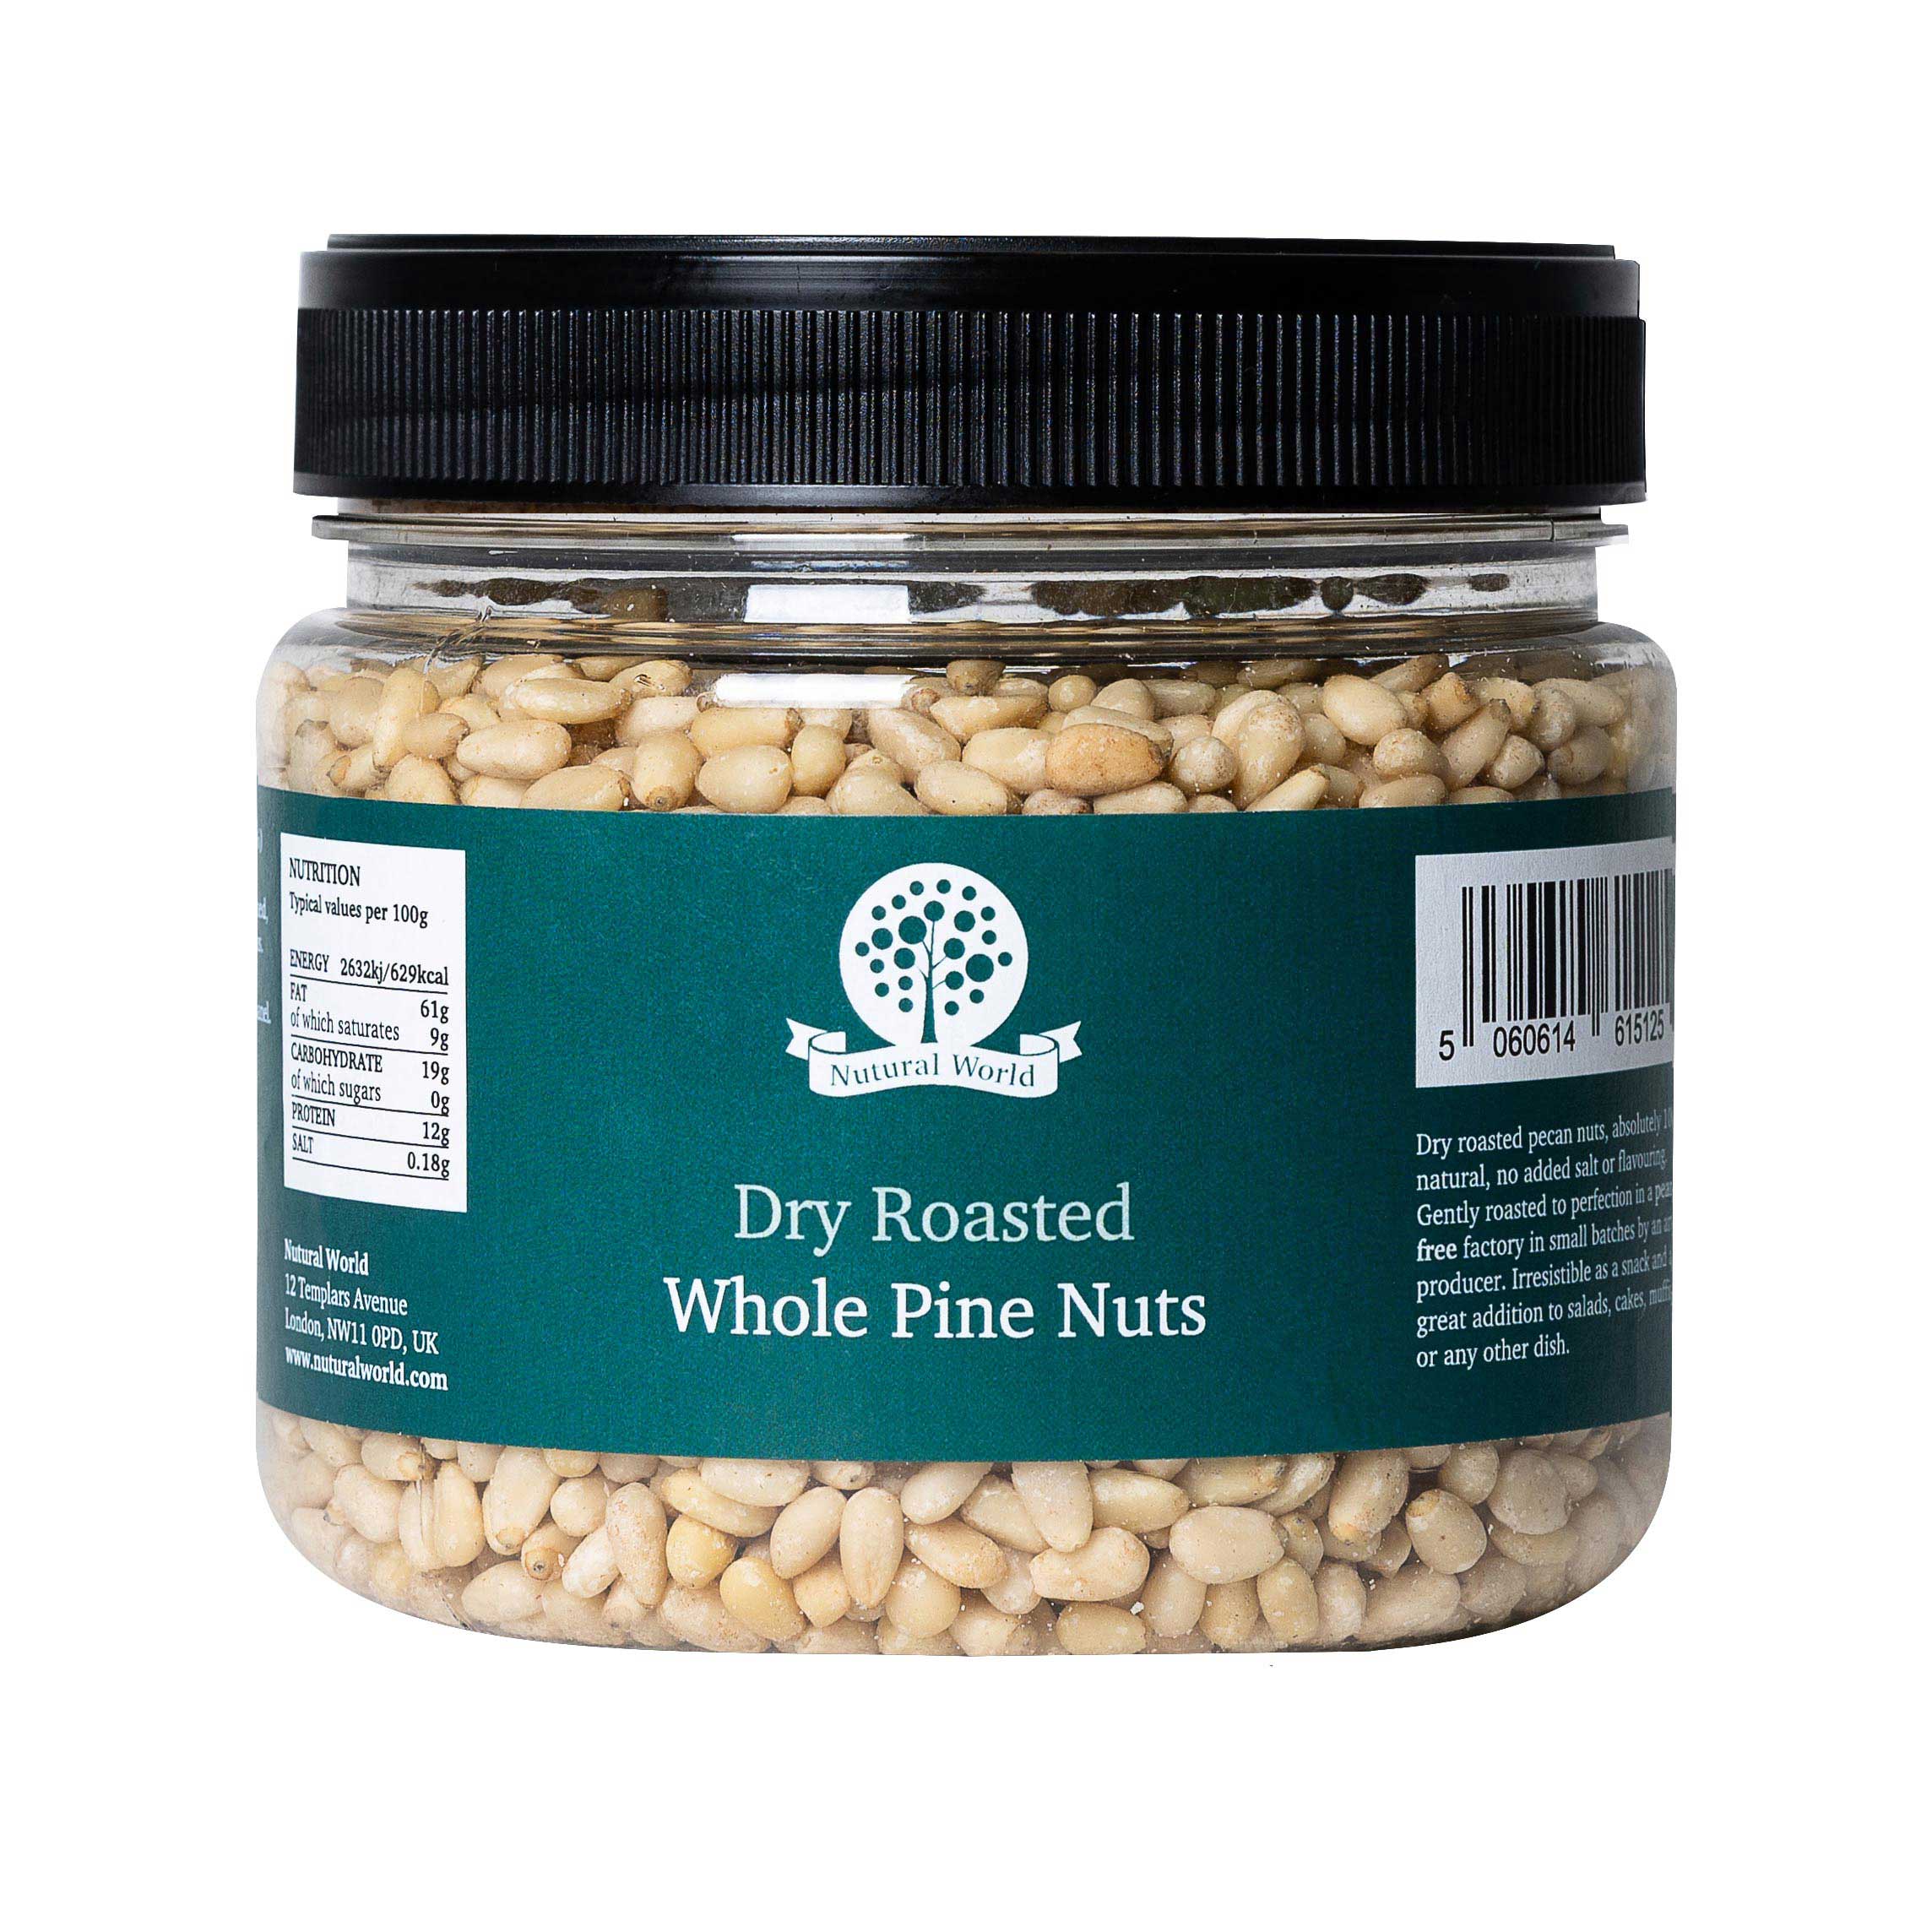 Dry Roasted Whole Pine Nuts – Unsalted (500g)